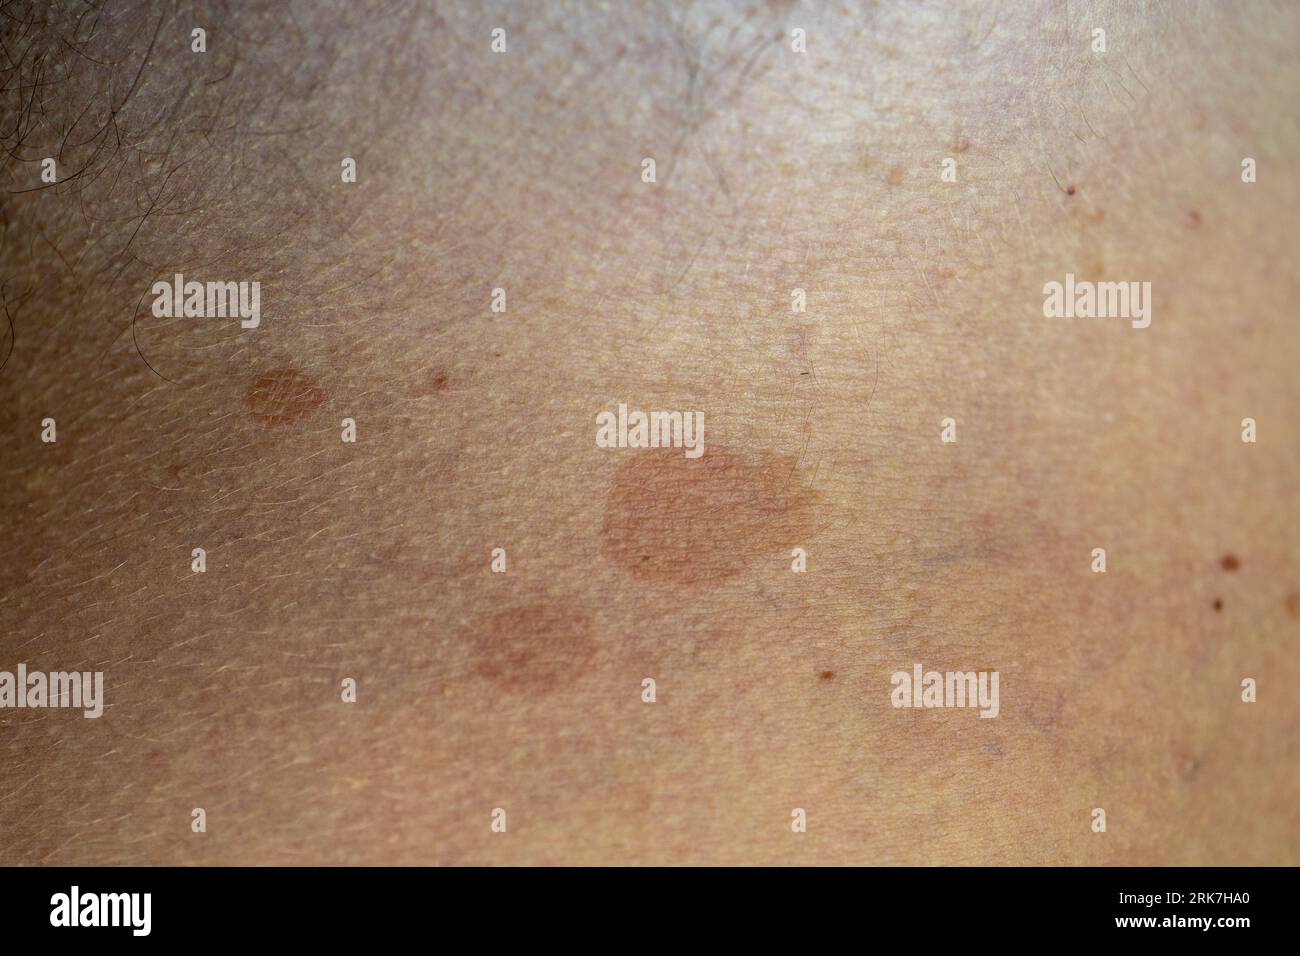 https://c8.alamy.com/comp/2RK7HA0/a-man-suffering-from-the-skin-condition-tinea-versicolor-with-discolored-patches-on-the-skin-2RK7HA0.jpg